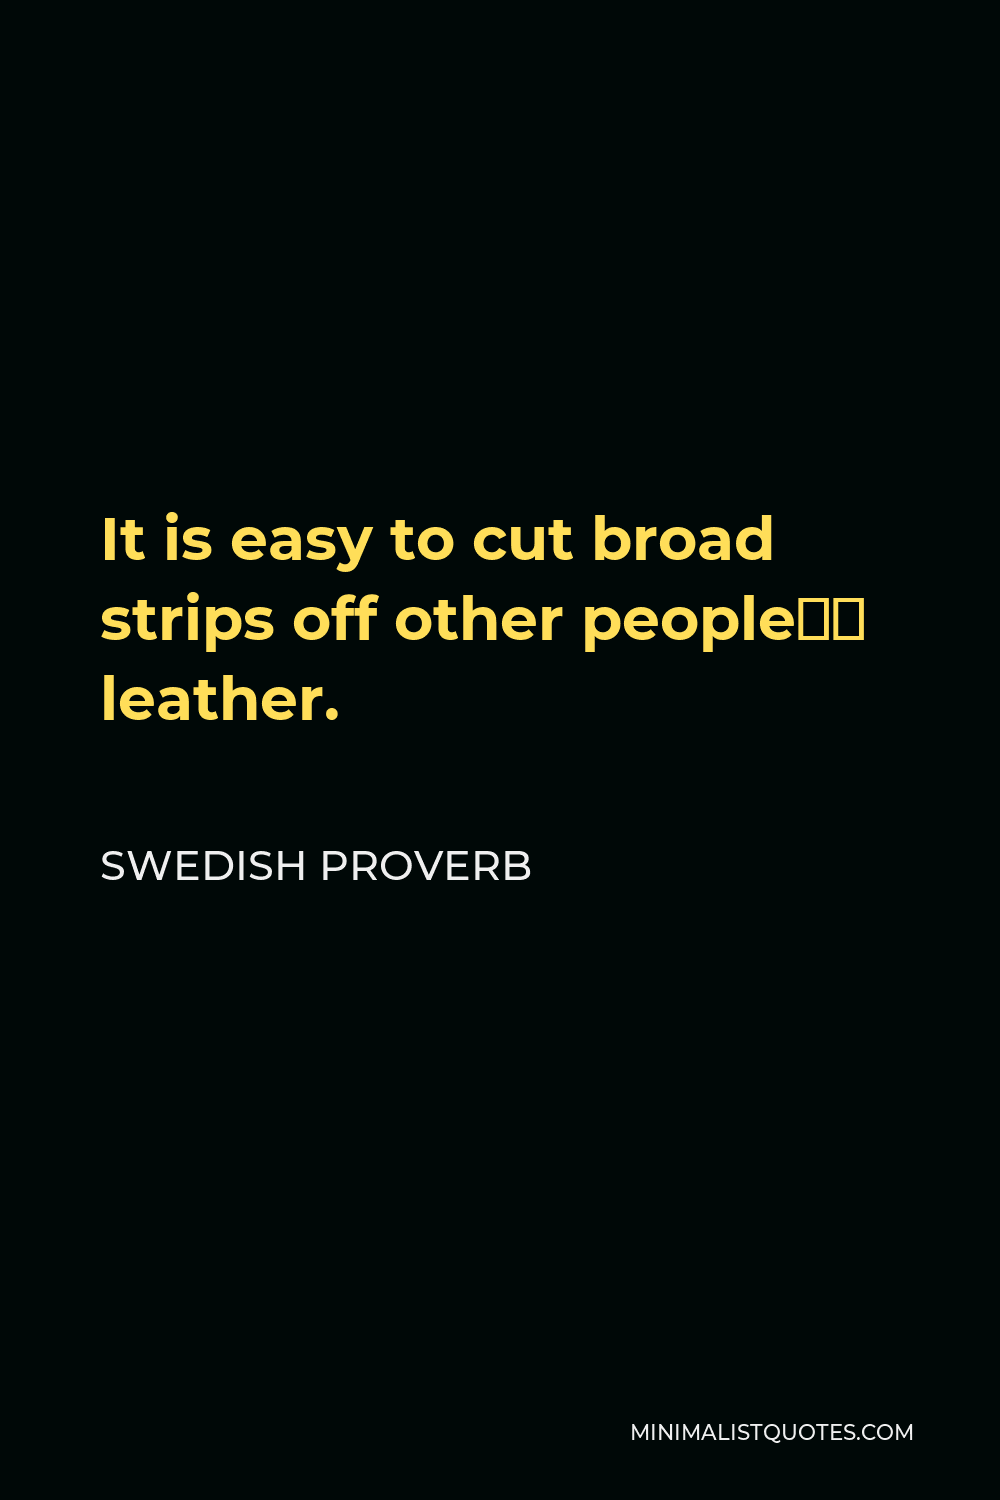 Swedish Proverb Quote - It is easy to cut broad strips off other people’s leather.